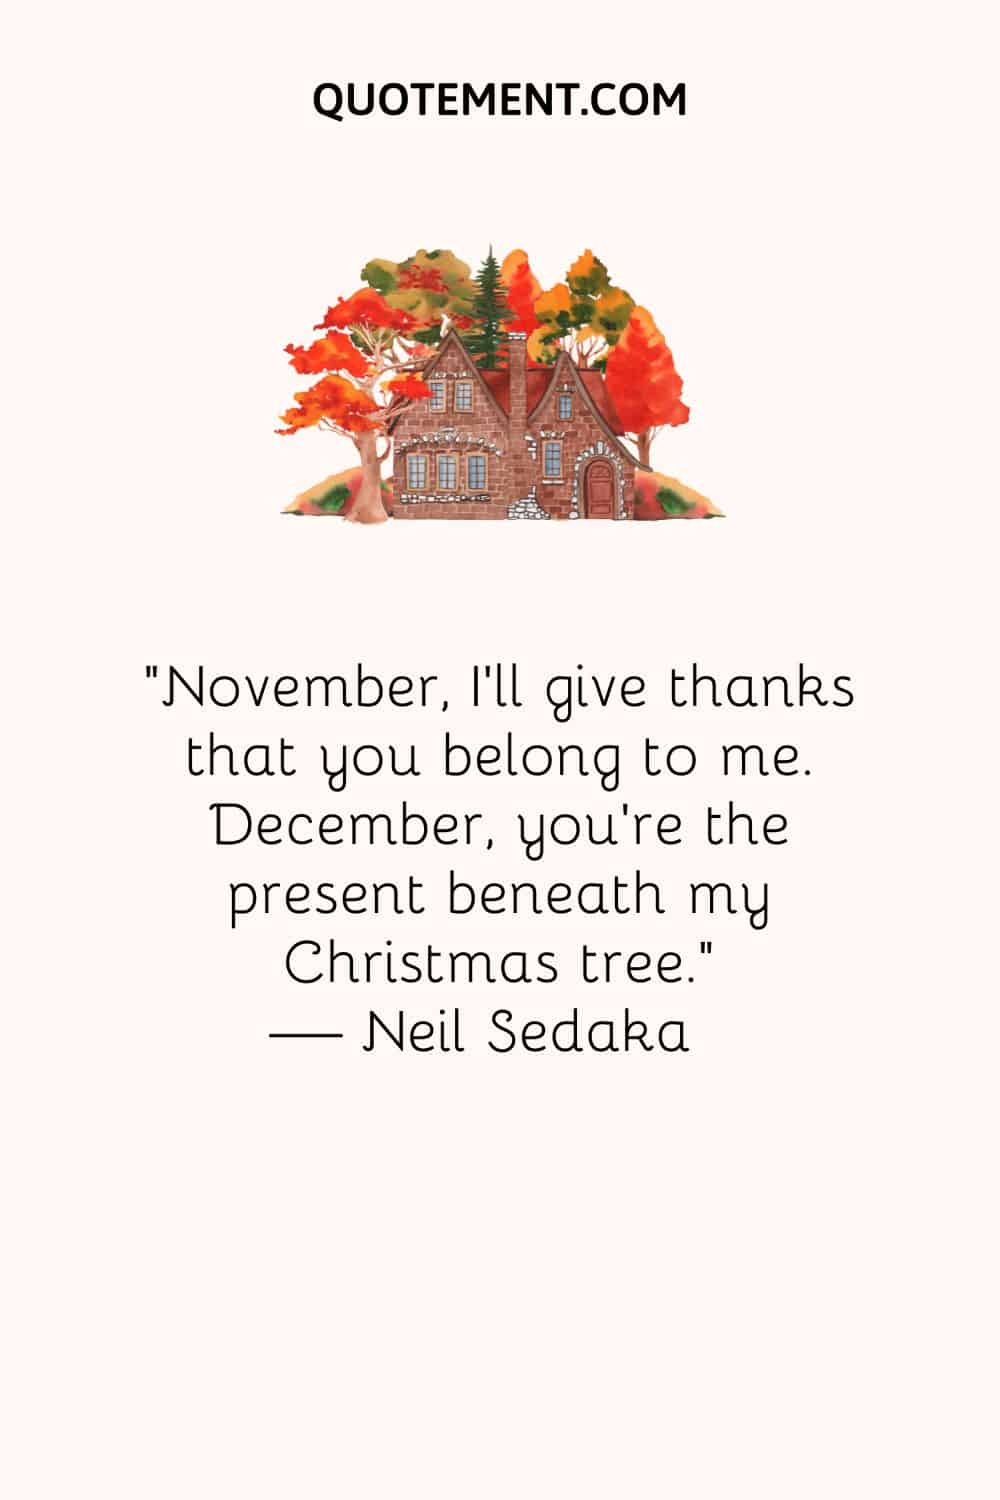 November, I’ll give thanks that you belong to me. December, you’re the present beneath my Christmas tree